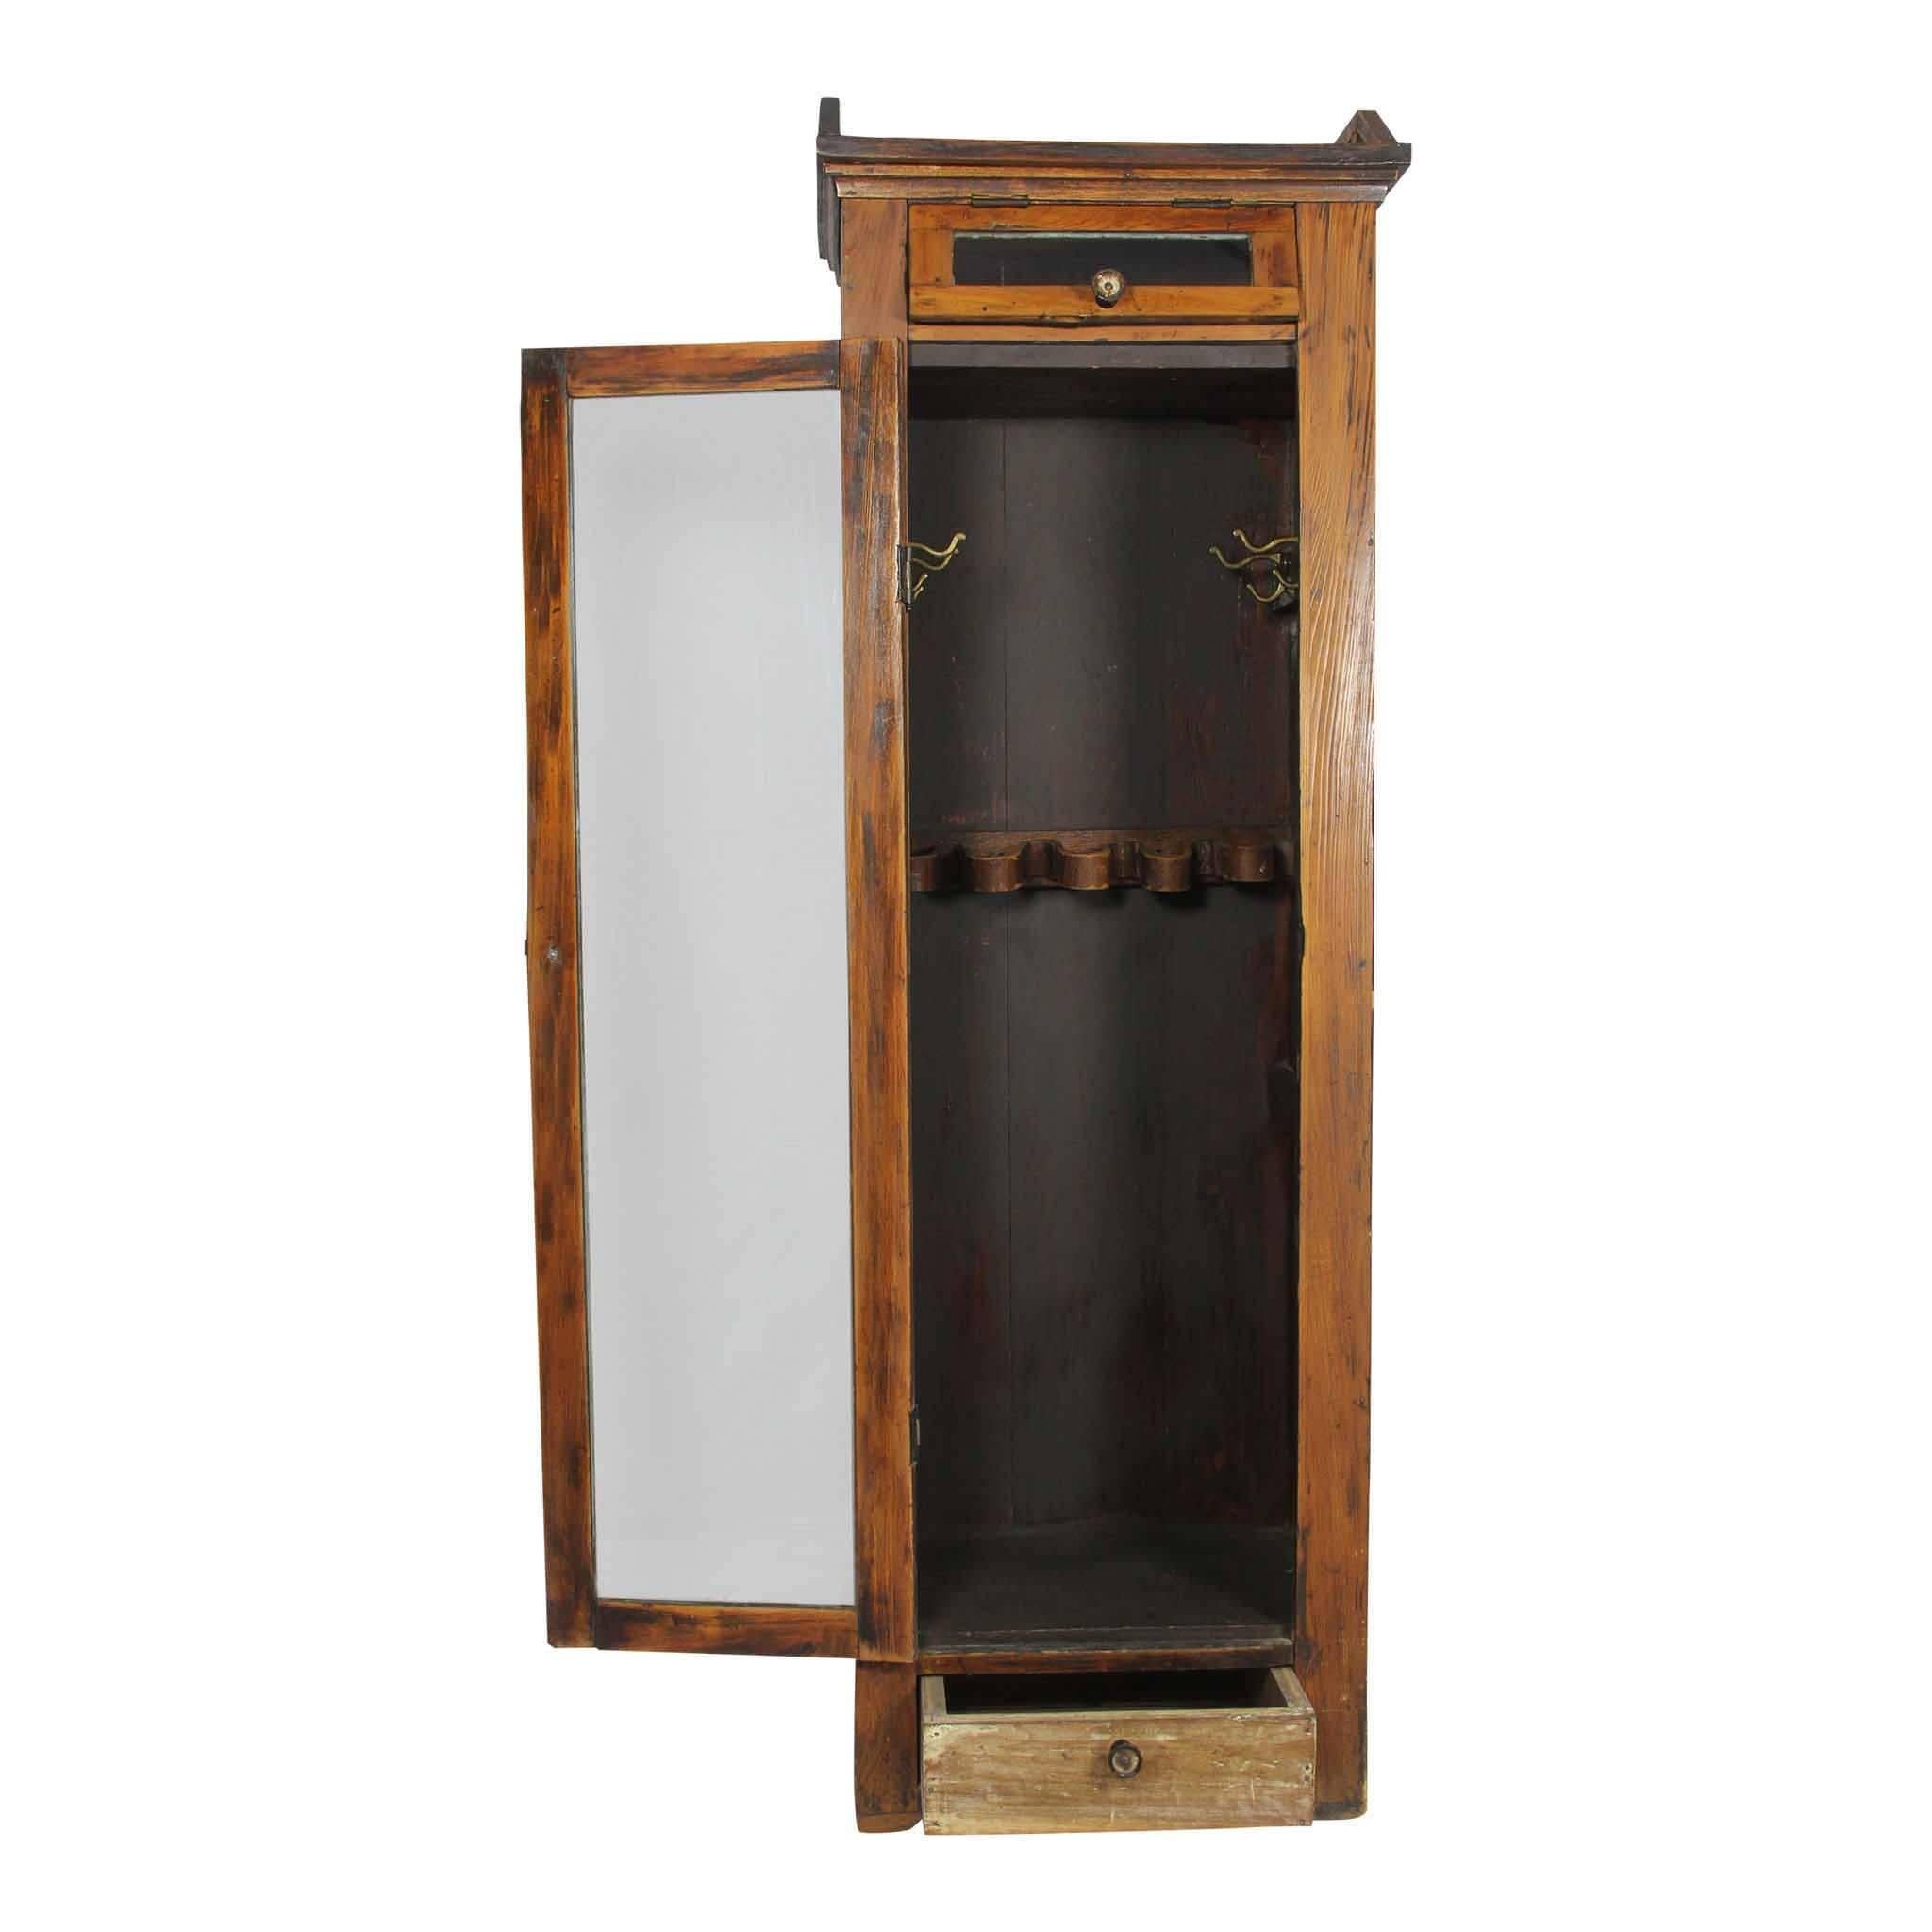 While we don't know the origin of this wooden locker, it appears to be a storage locker for baseball gear. Behind the glass door, the inside features four double hooks, two on each side, and a tacked and snaking leather strap (used for baseball